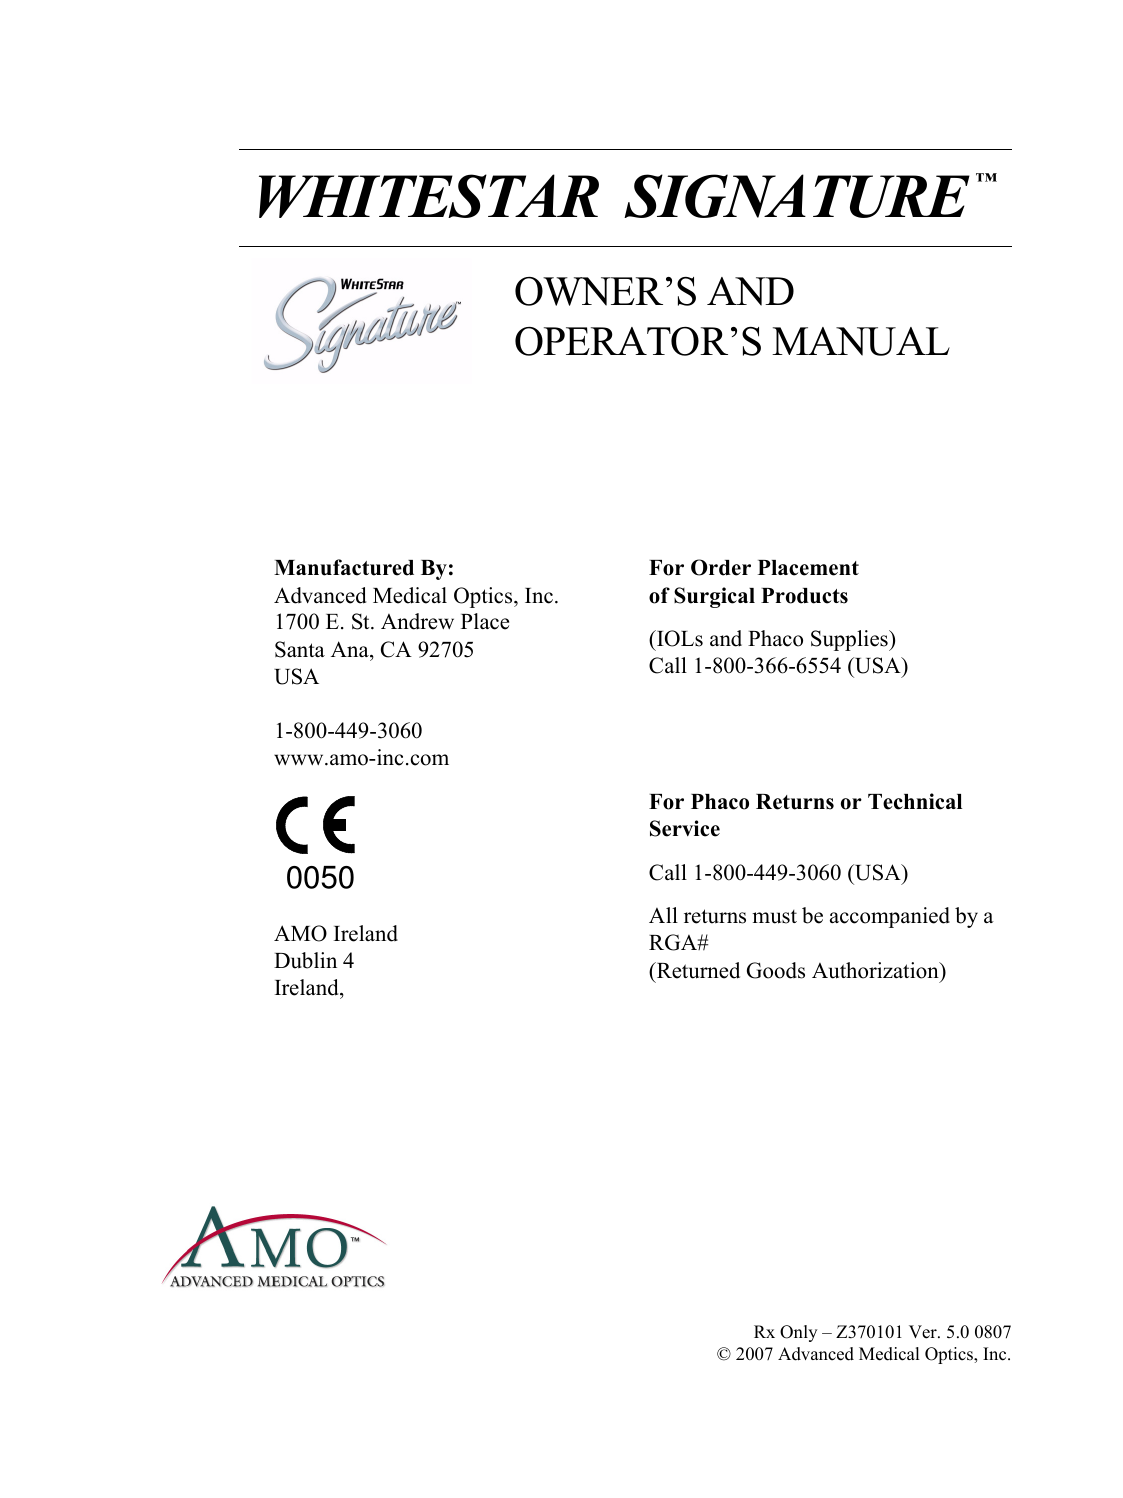  WHITESTAR  SIGNATURE ™OWNER’S AND OPERATOR’S MANUALManufactured By:Advanced Medical Optics, Inc.1700 E. St. Andrew PlaceSanta Ana, CA 92705USA1-800-449-3060www.amo-inc.comFor Order Placement of Surgical Products(IOLs and Phaco Supplies)Call 1-800-366-6554 (USA)AMO IrelandDublin 4Ireland,For Phaco Returns or Technical ServiceCall 1-800-449-3060 (USA)All returns must be accompanied by a RGA#(Returned Goods Authorization)0050Rx Only – Z370101 Ver. 5.0 0807© 2007 Advanced Medical Optics, Inc.